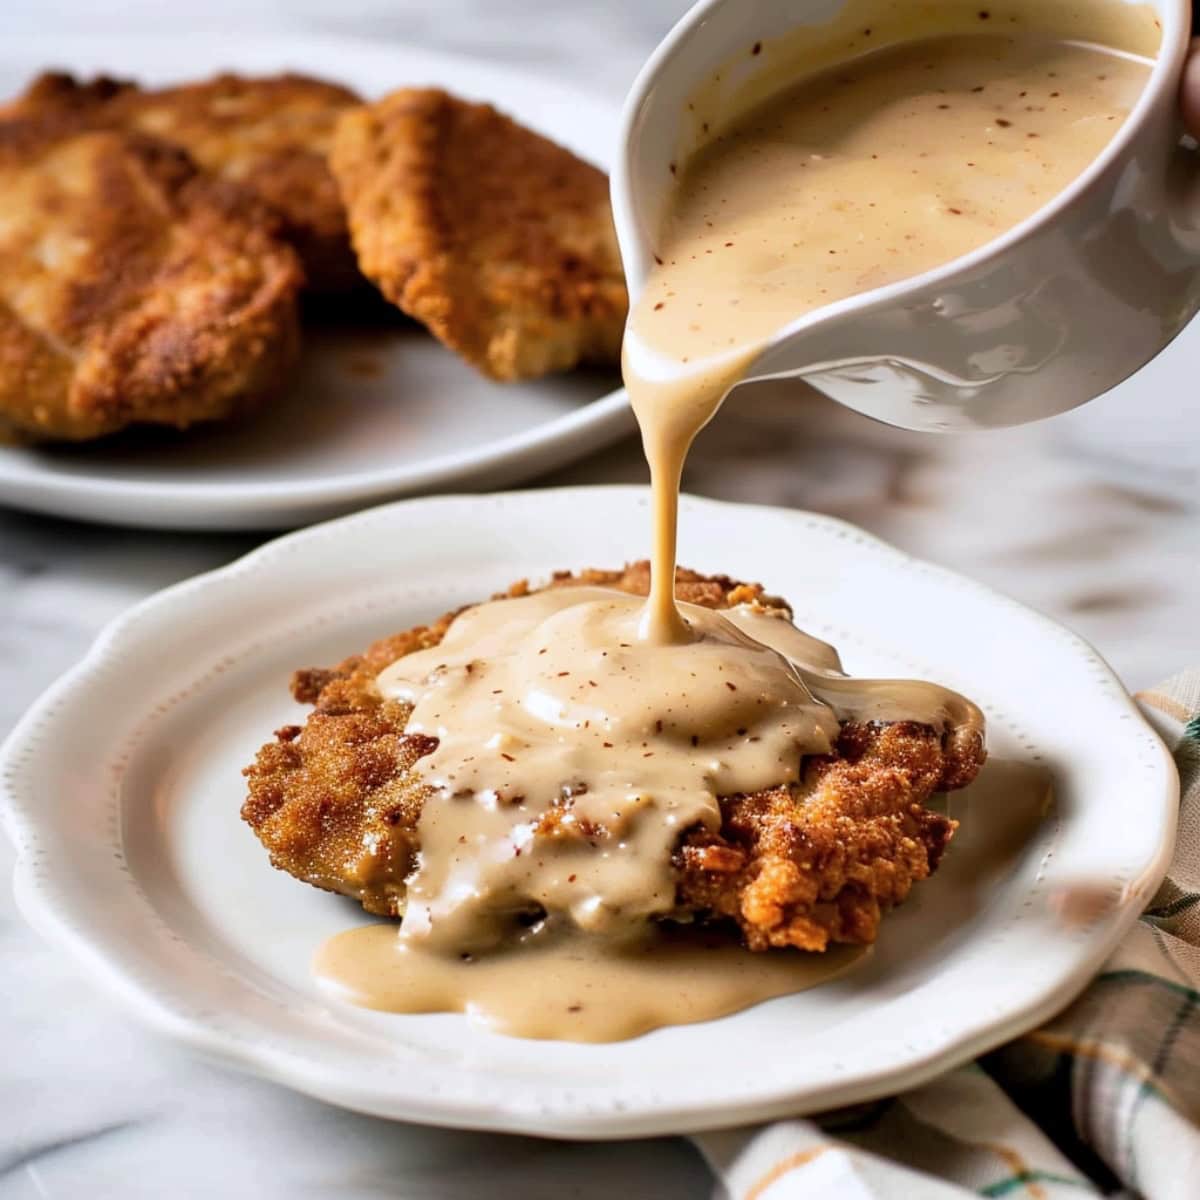 Gravy poured into a chicken fried steak in a white plate.